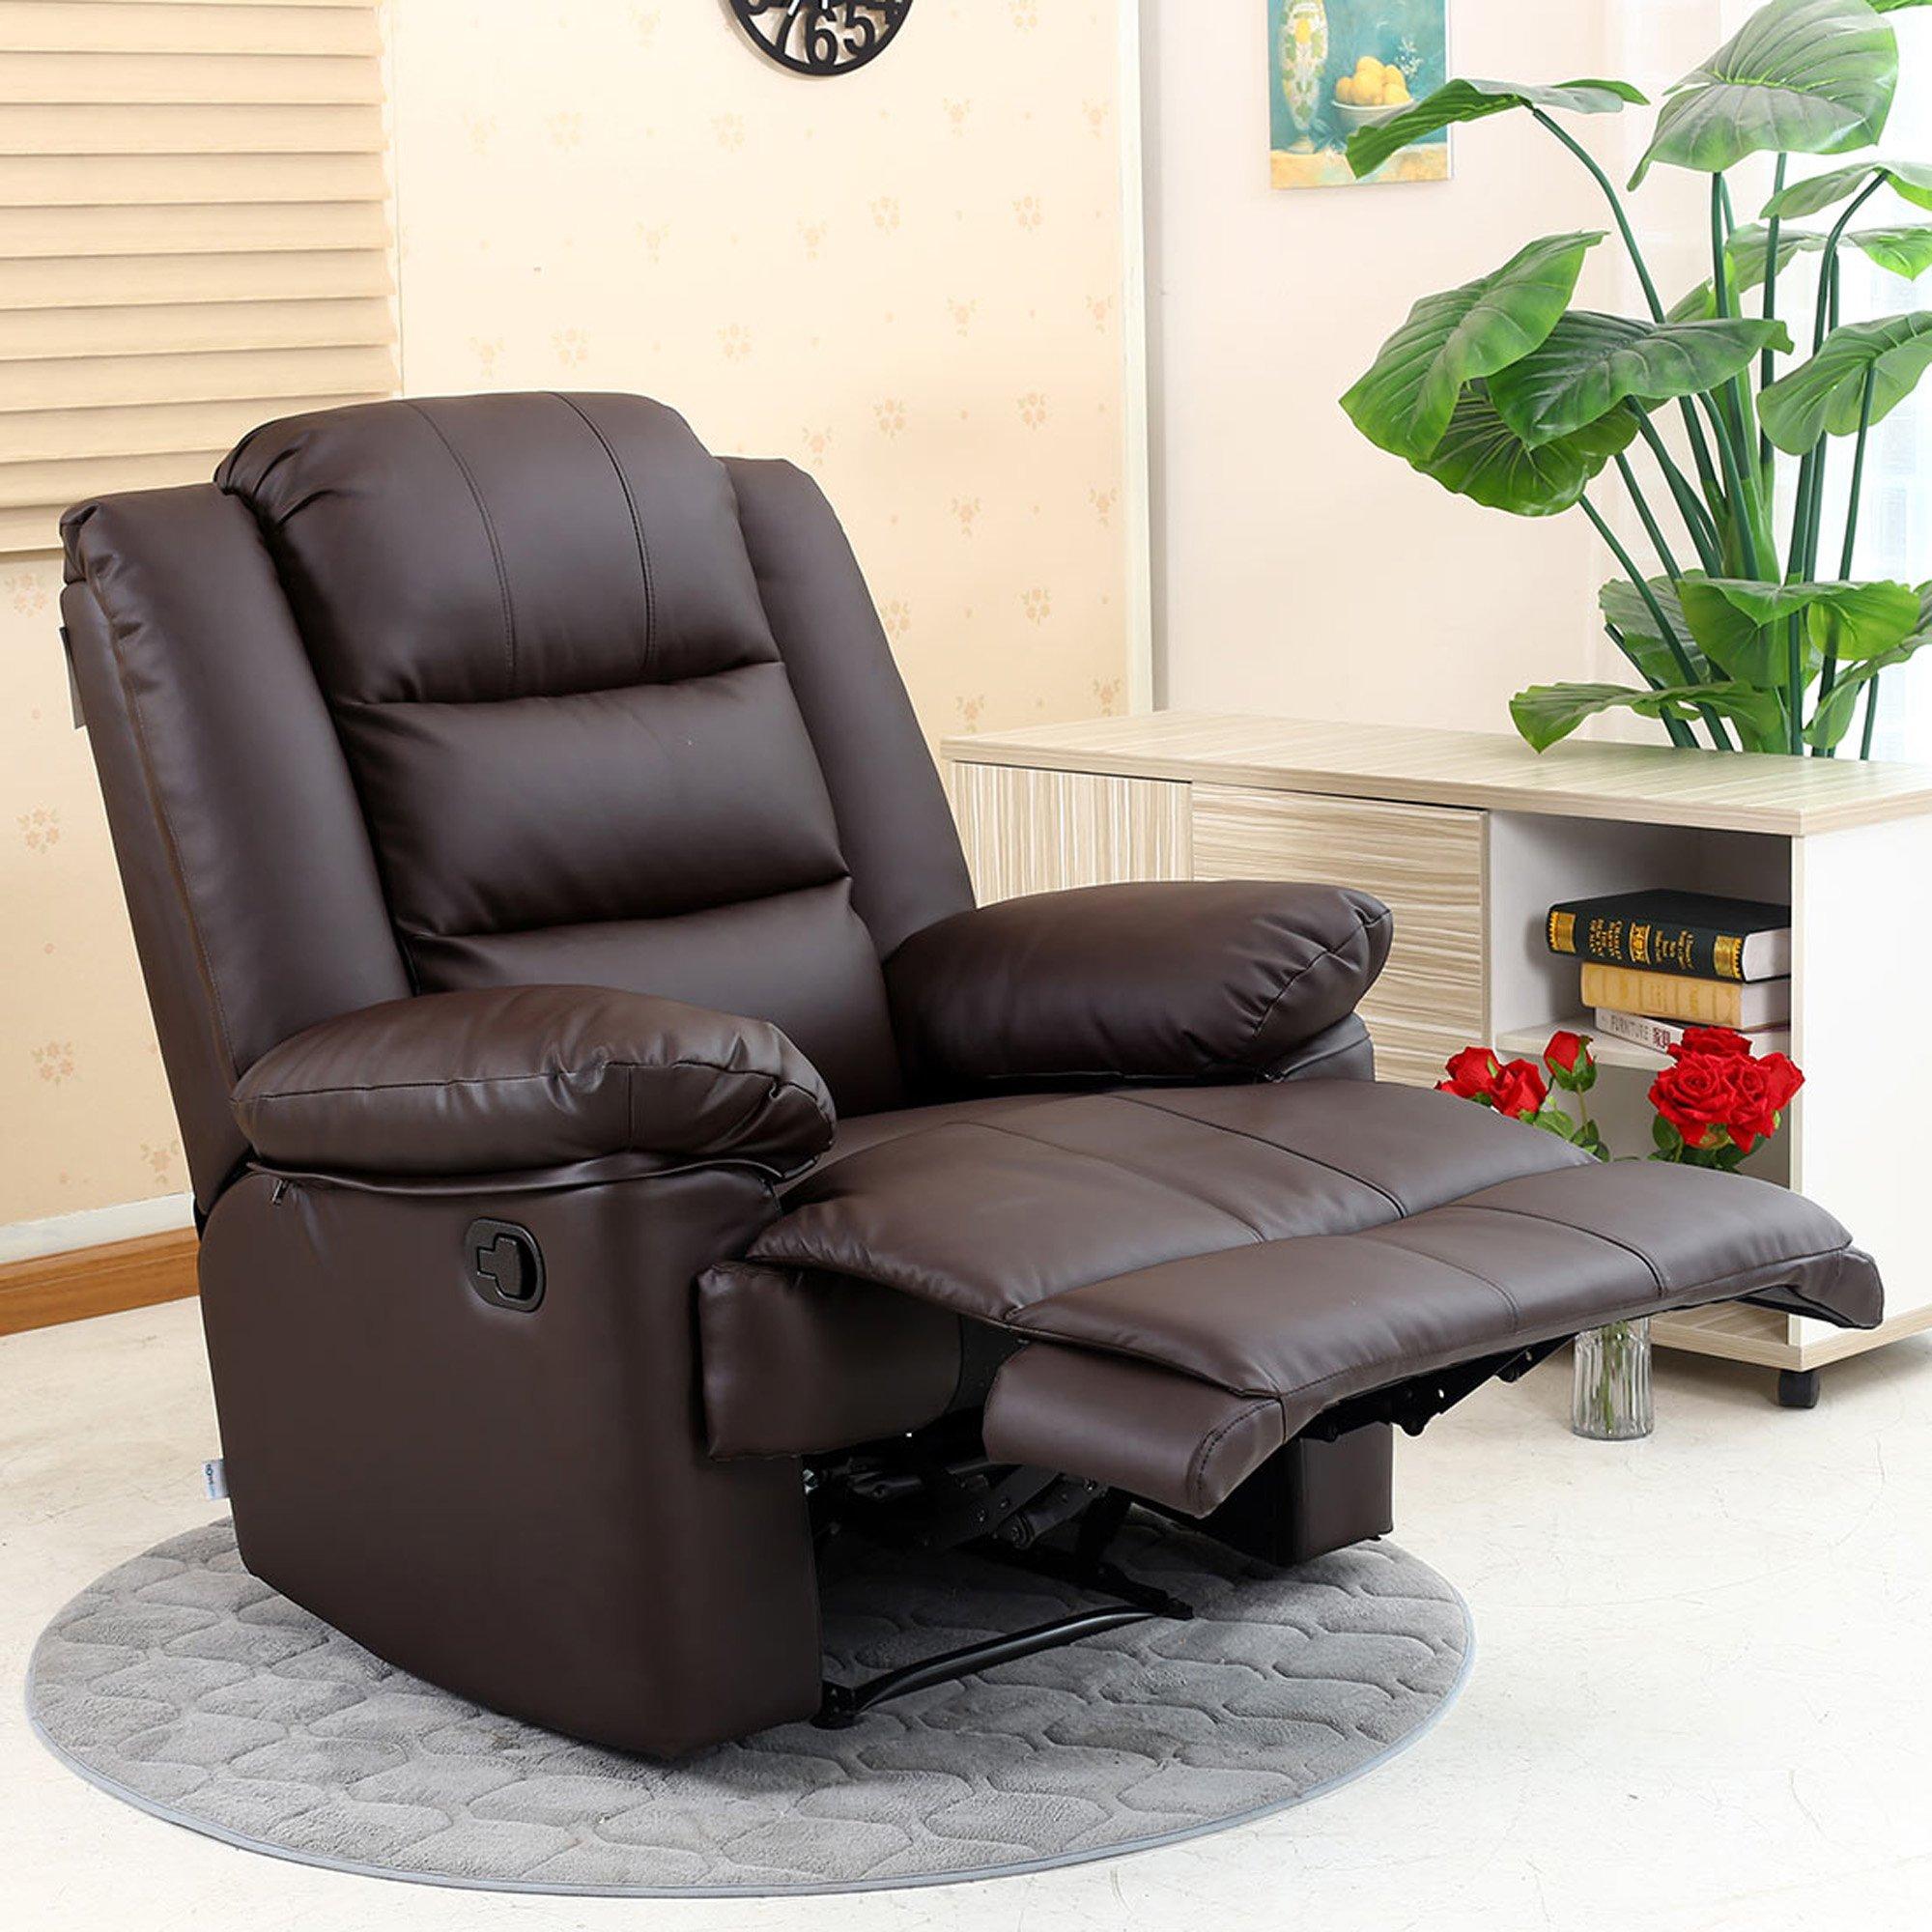 Loxley Bonded Leather Manual Recliner Armchair Sofa Home Lounge Chair